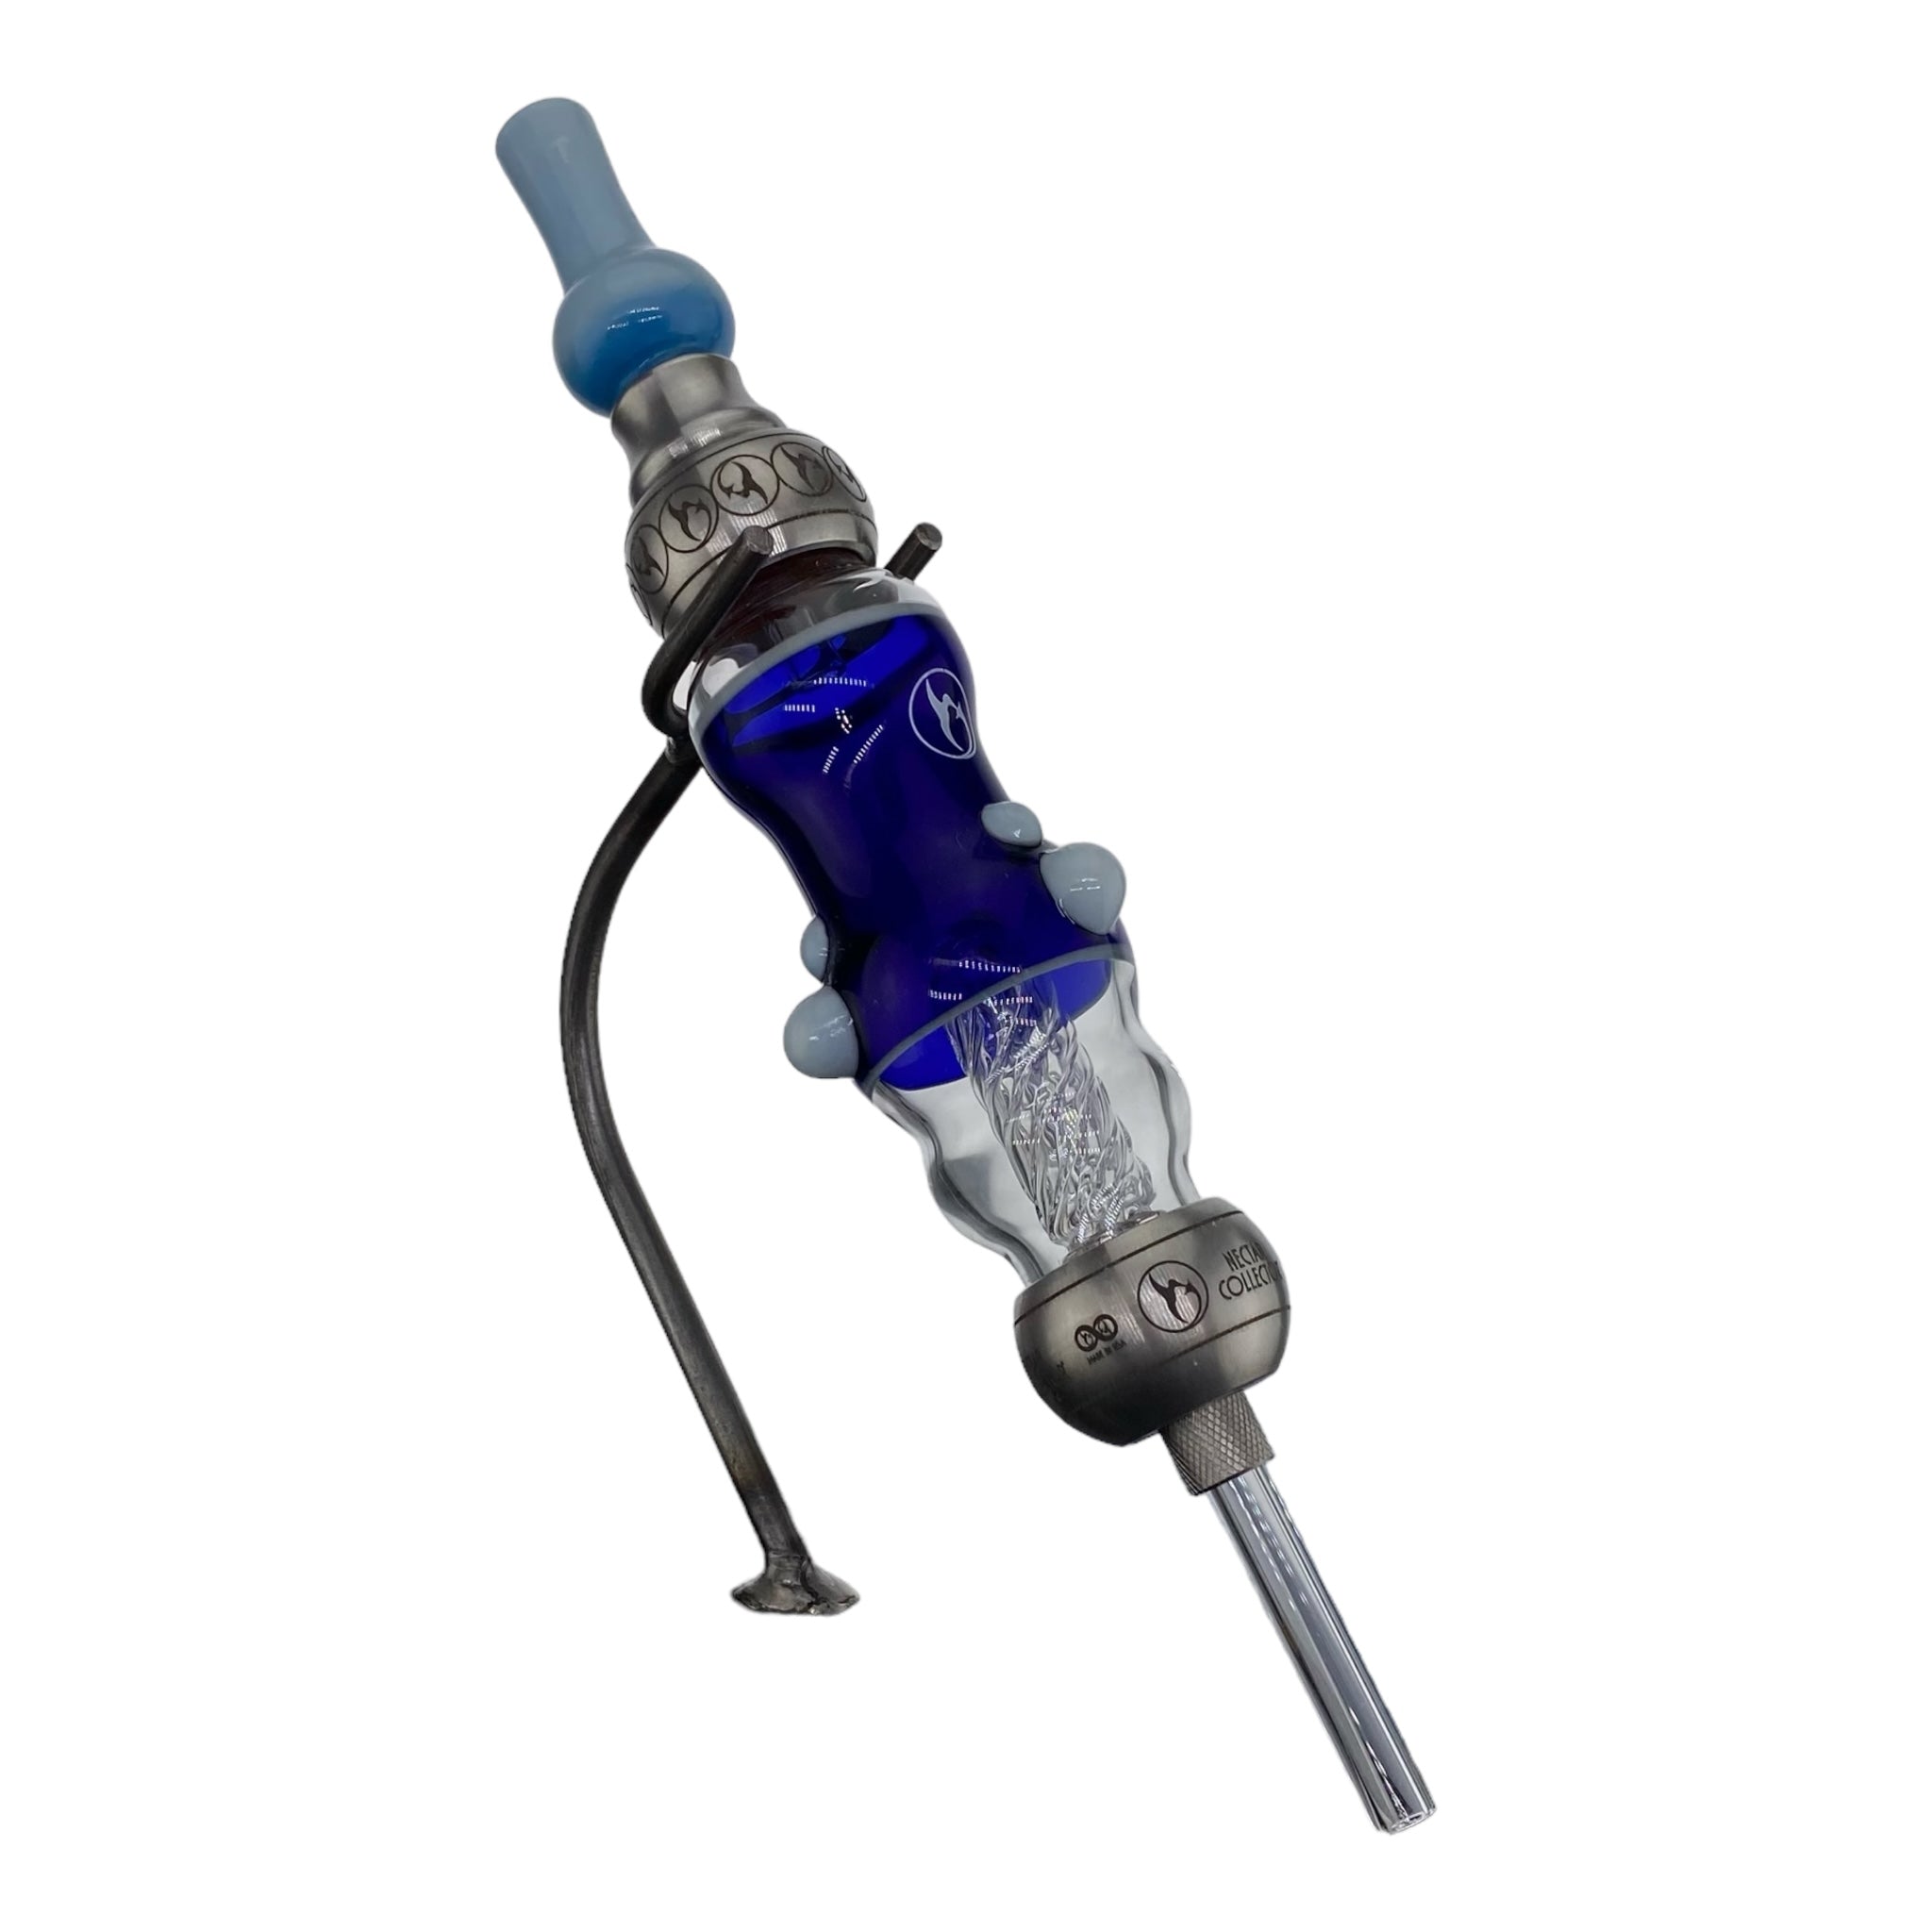 Nectar Collector Dab Straw Metal Stand display for sale